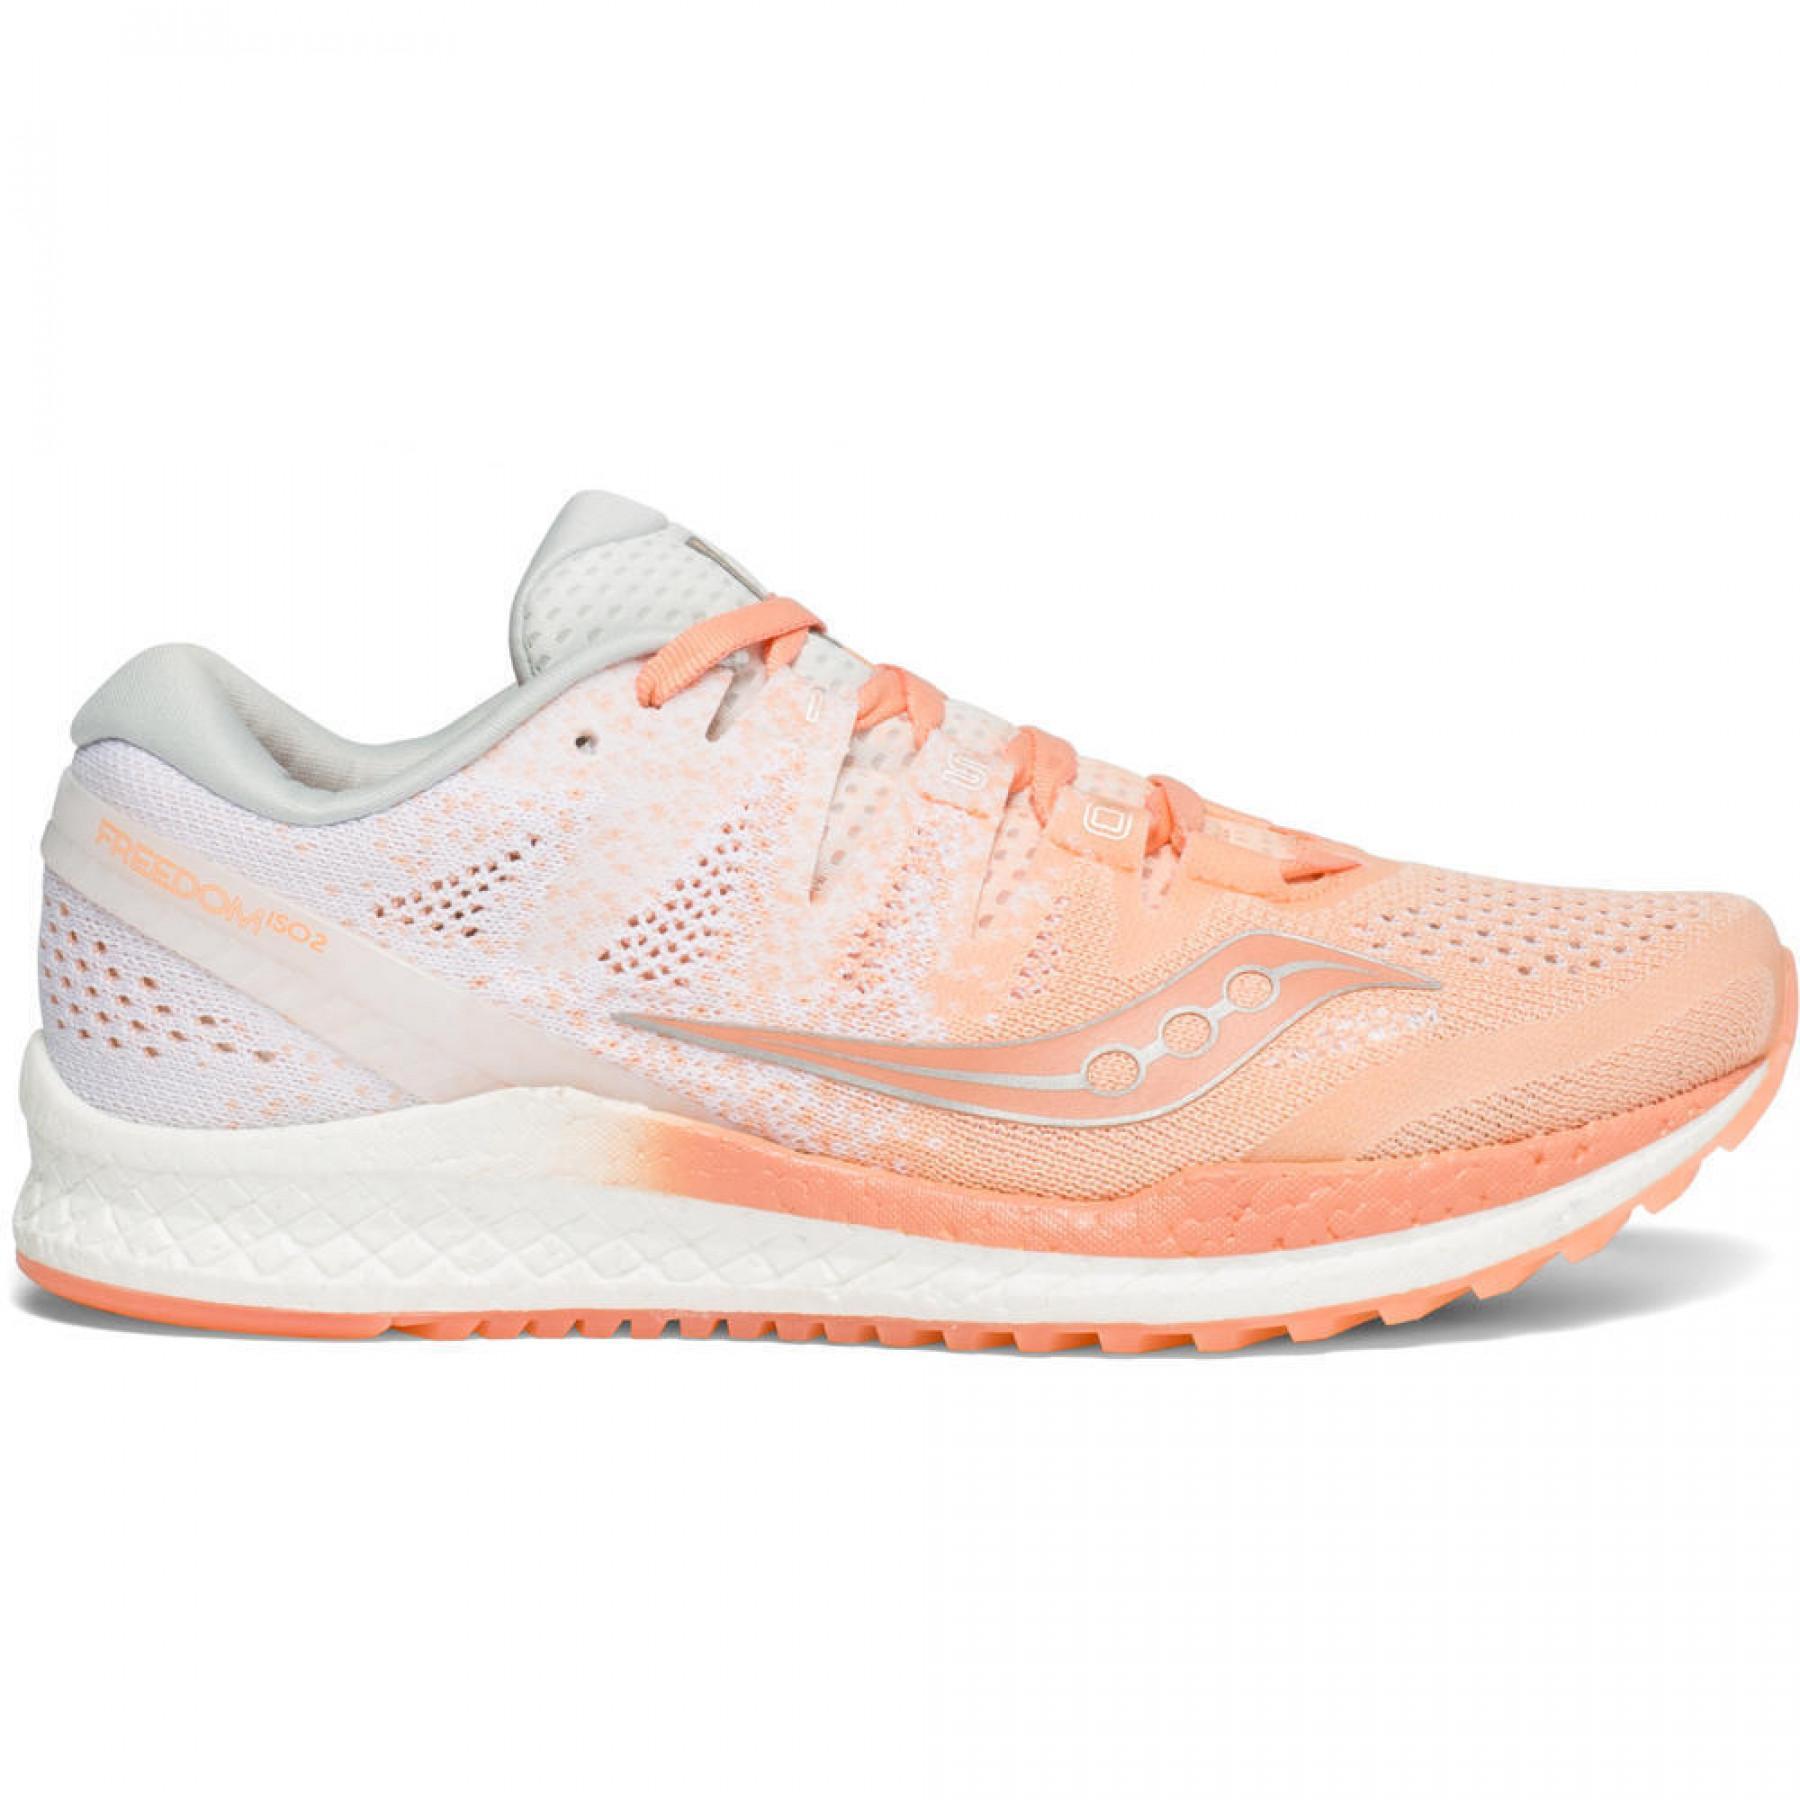 Chaussures de running femme Saucony Freedom Iso 2